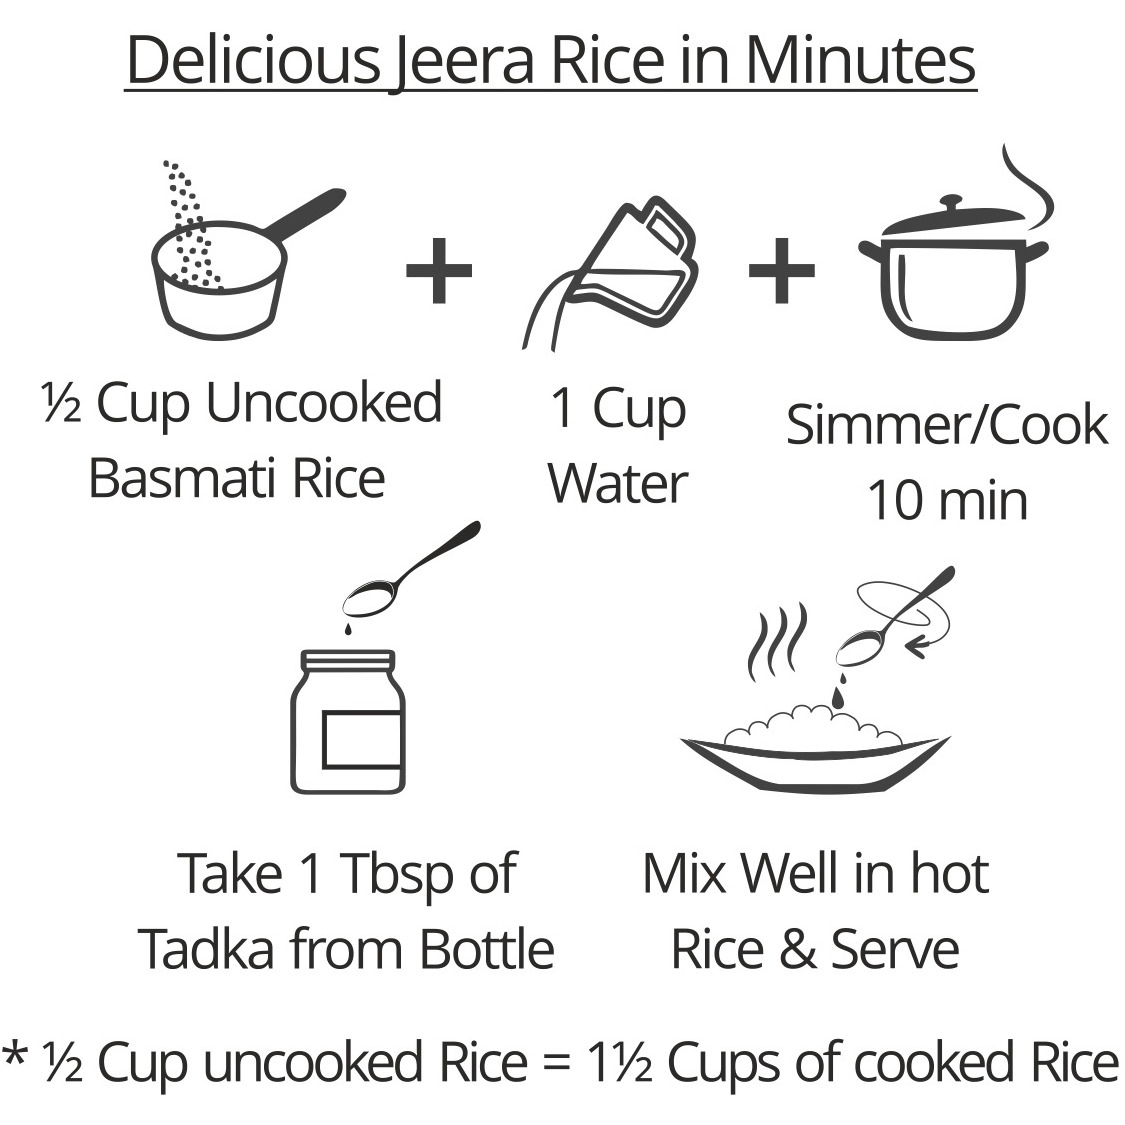 EL The Cook Ready-to-Use Ghee Tadka(CONCENRATED Whole Spice Tempering) for Jeera/Cumin Rice, Indian Rice Seasoning, Super Saver Jar Pack, 6.34oz, Vegetarian, Gluten-Free (Flavor: Jeera Rice)